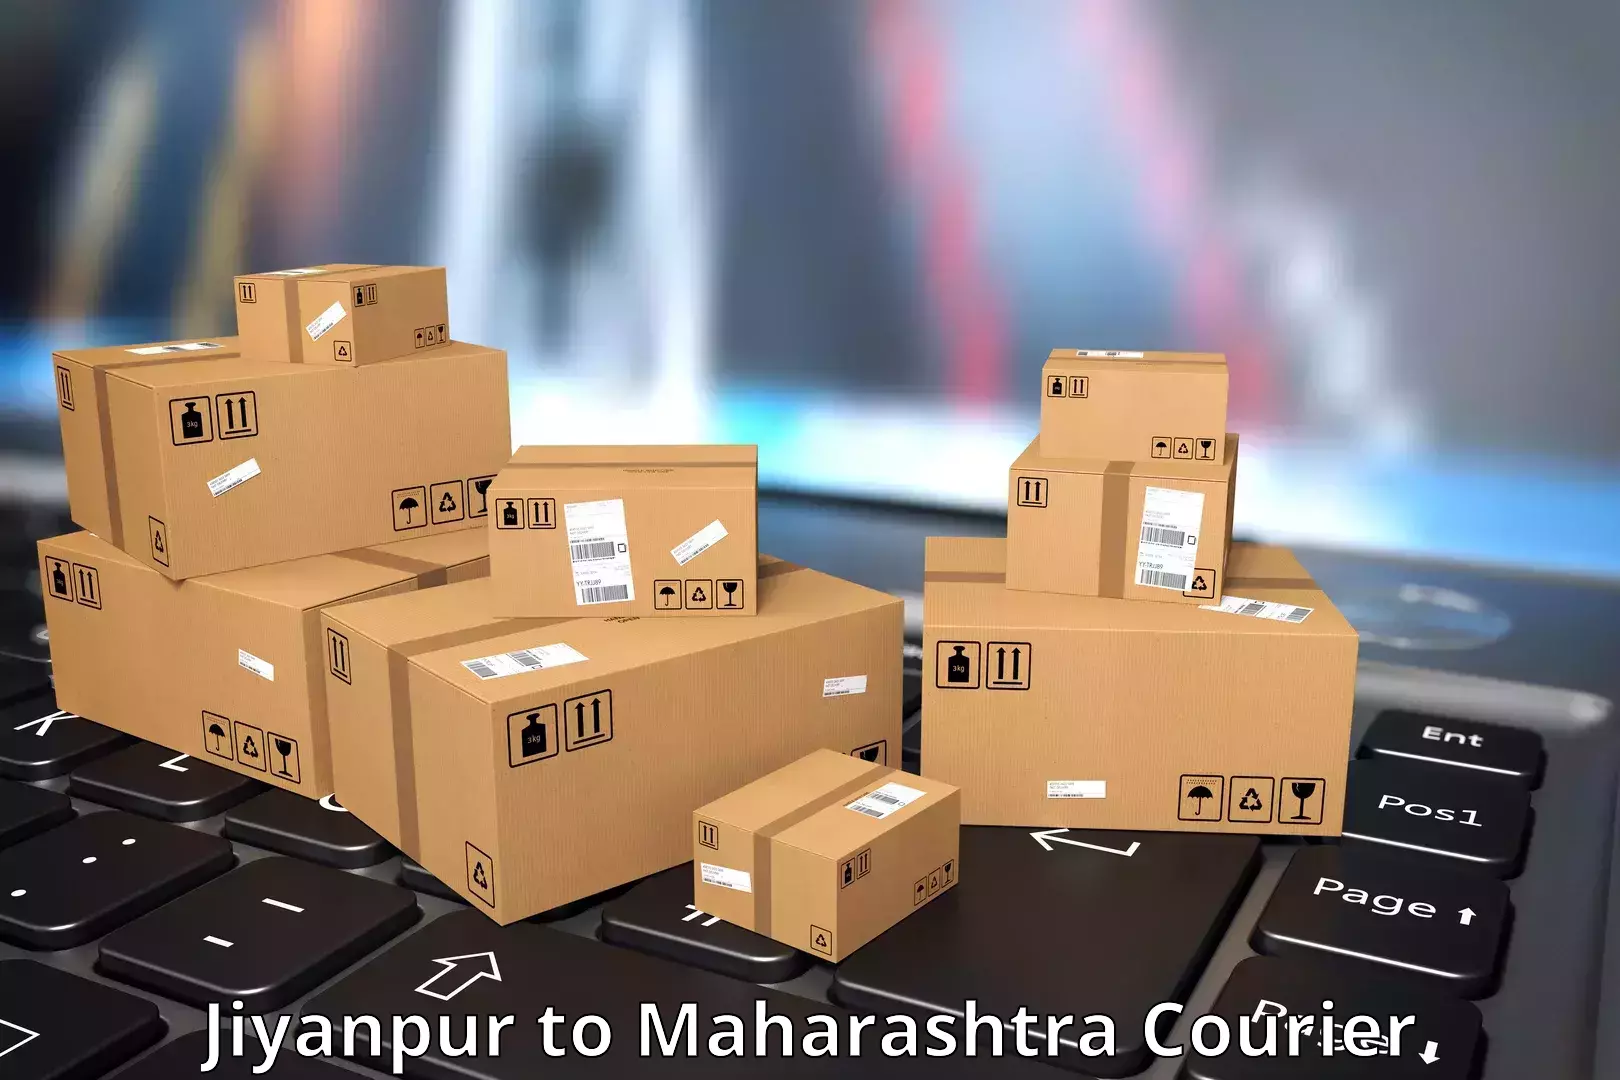 24-hour courier service Jiyanpur to Nagpur